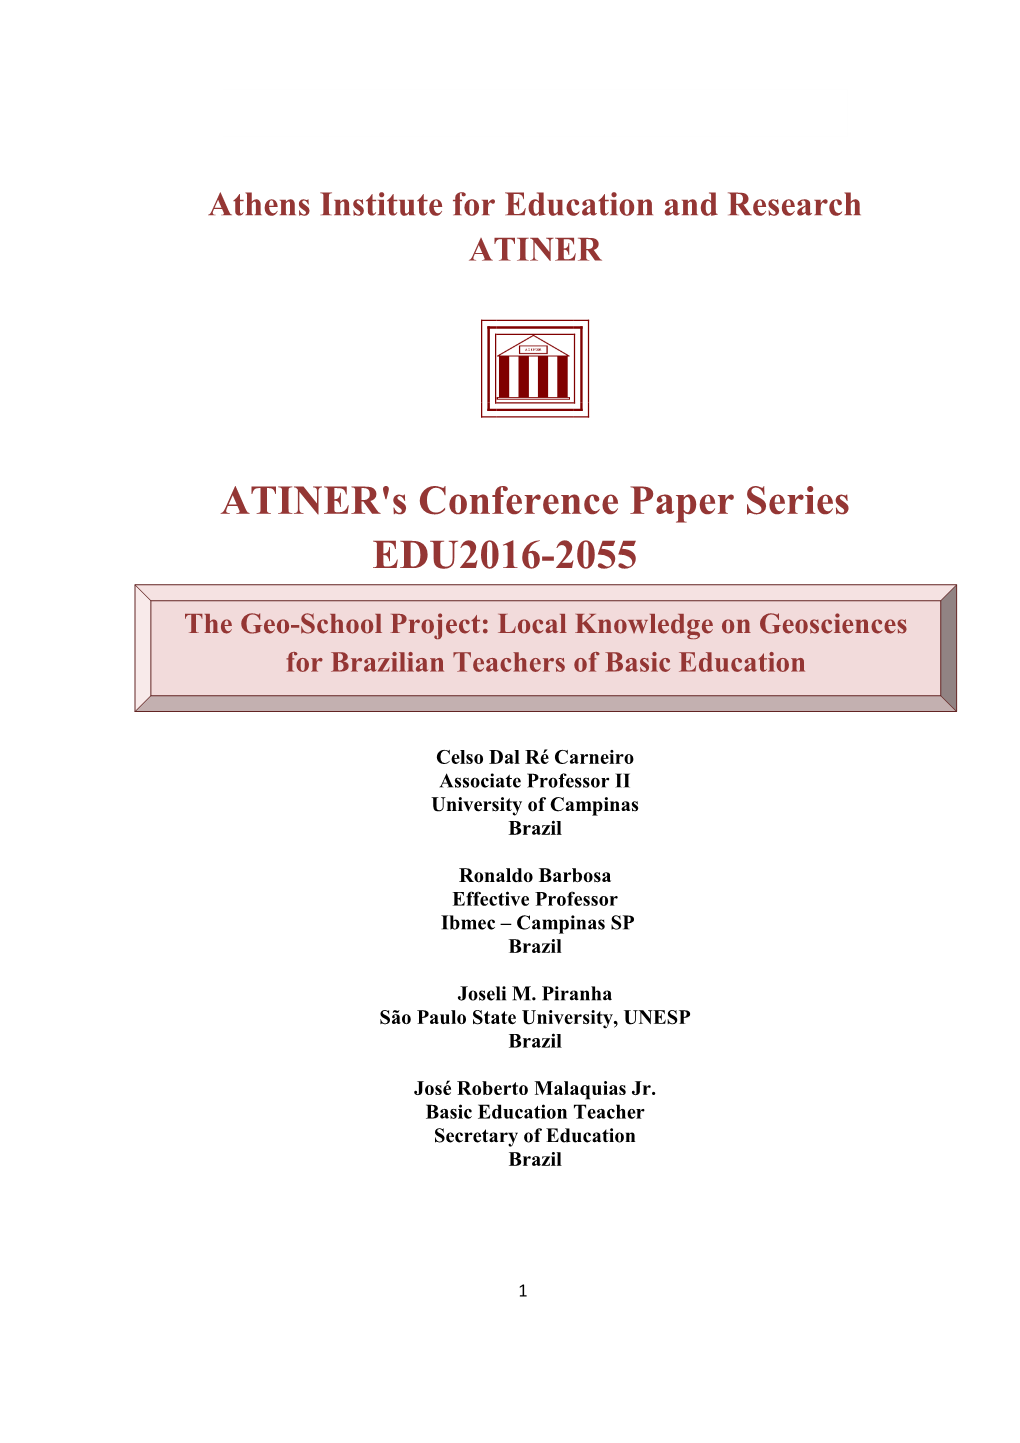 ATINER's Conference Paper Series EDU2016-2055